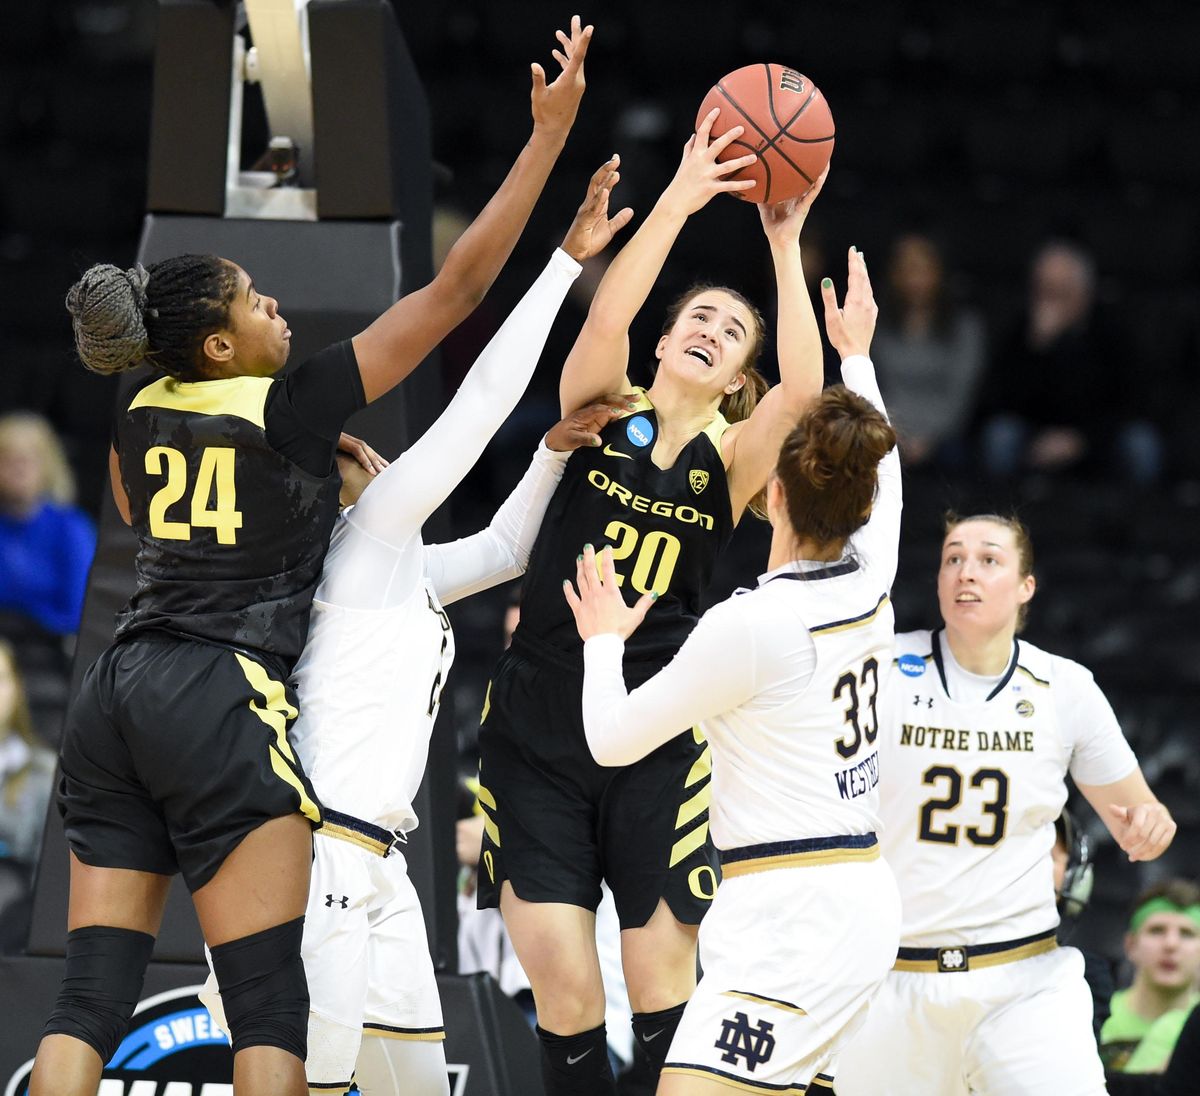 Oregon Ducks guard Sabrina Ionescu (20) rebounds the ball against the Notre Dame Fighting Irish during the first half of a 2018 NCAA Women